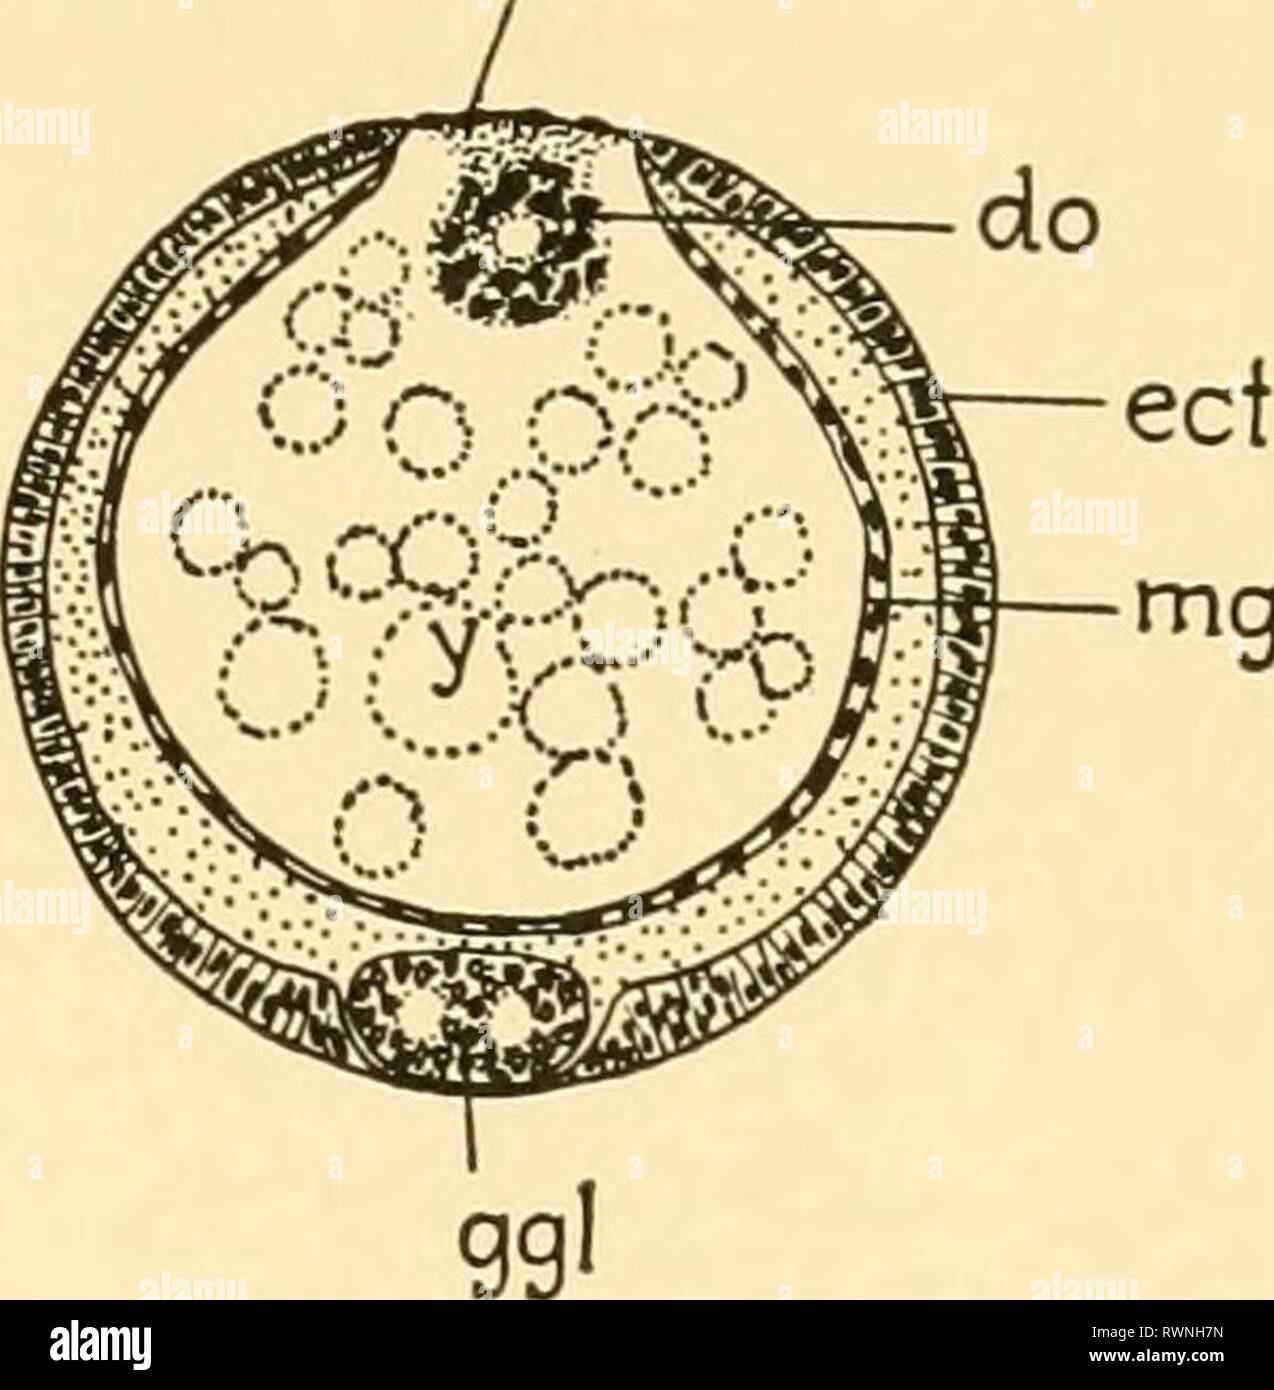 Embryology of insects and myriapods; Embryology of insects and myriapods; the developmental history of insects, centipedes, and millepedes from egg desposition [!] to hatching embryologyofinse00joha Year: 1941  EMBRYONIC ENVELOPES, DORSAL ORGANS, BLASTOKINESIS 51 The qviestion as to the homologies of the amnion and serosa witli reference to structures existing in the Arthropoda lacking these envelopes has frequently been raised by embryologists. With the Collembola there is no unanimity of opinion. Heymons thought that the primary dorsal organ of the Onychophora, Myriapoda, and Apterygota was  Stock Photo